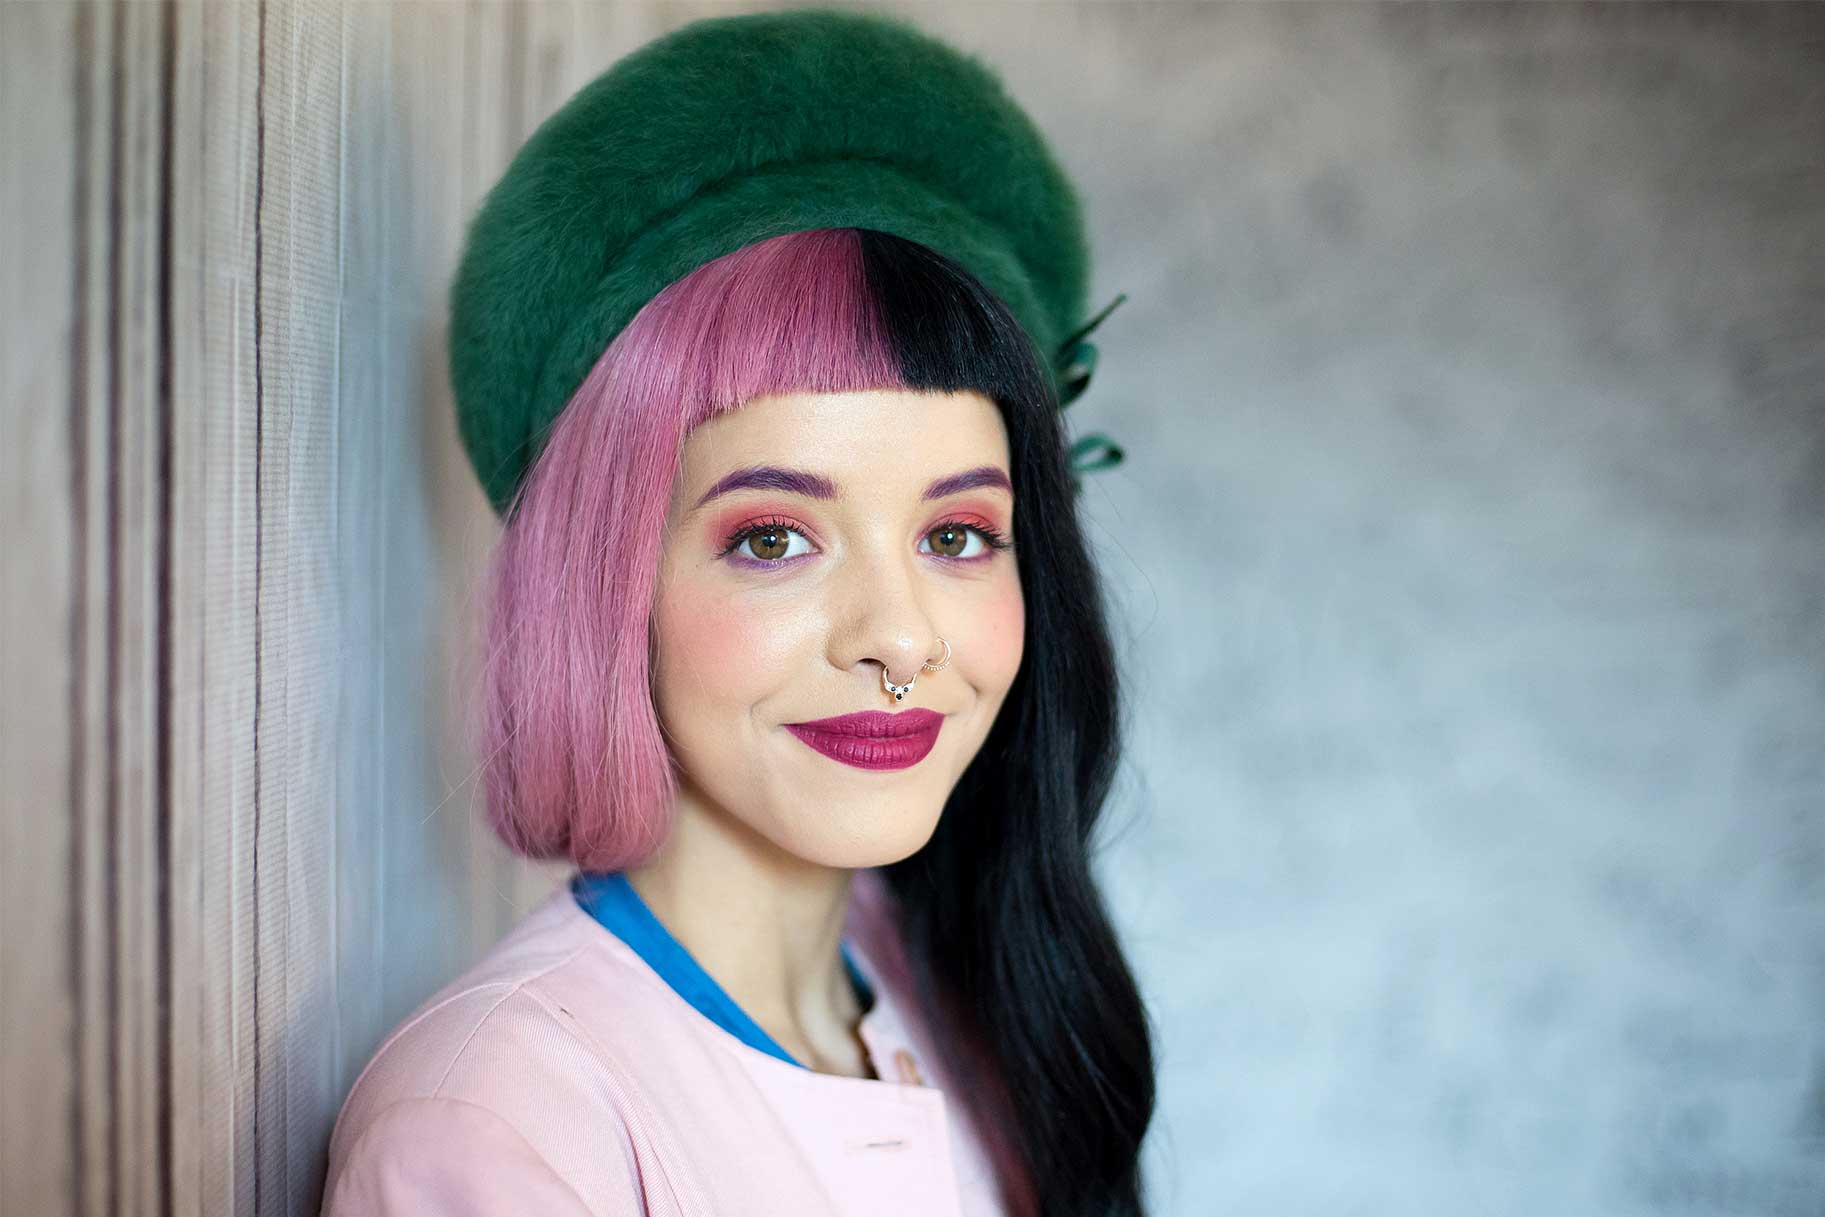 Melanie Martinez attends the AOL Build Speaker Series to discuss "Cry Baby" at AOL Studios In New York